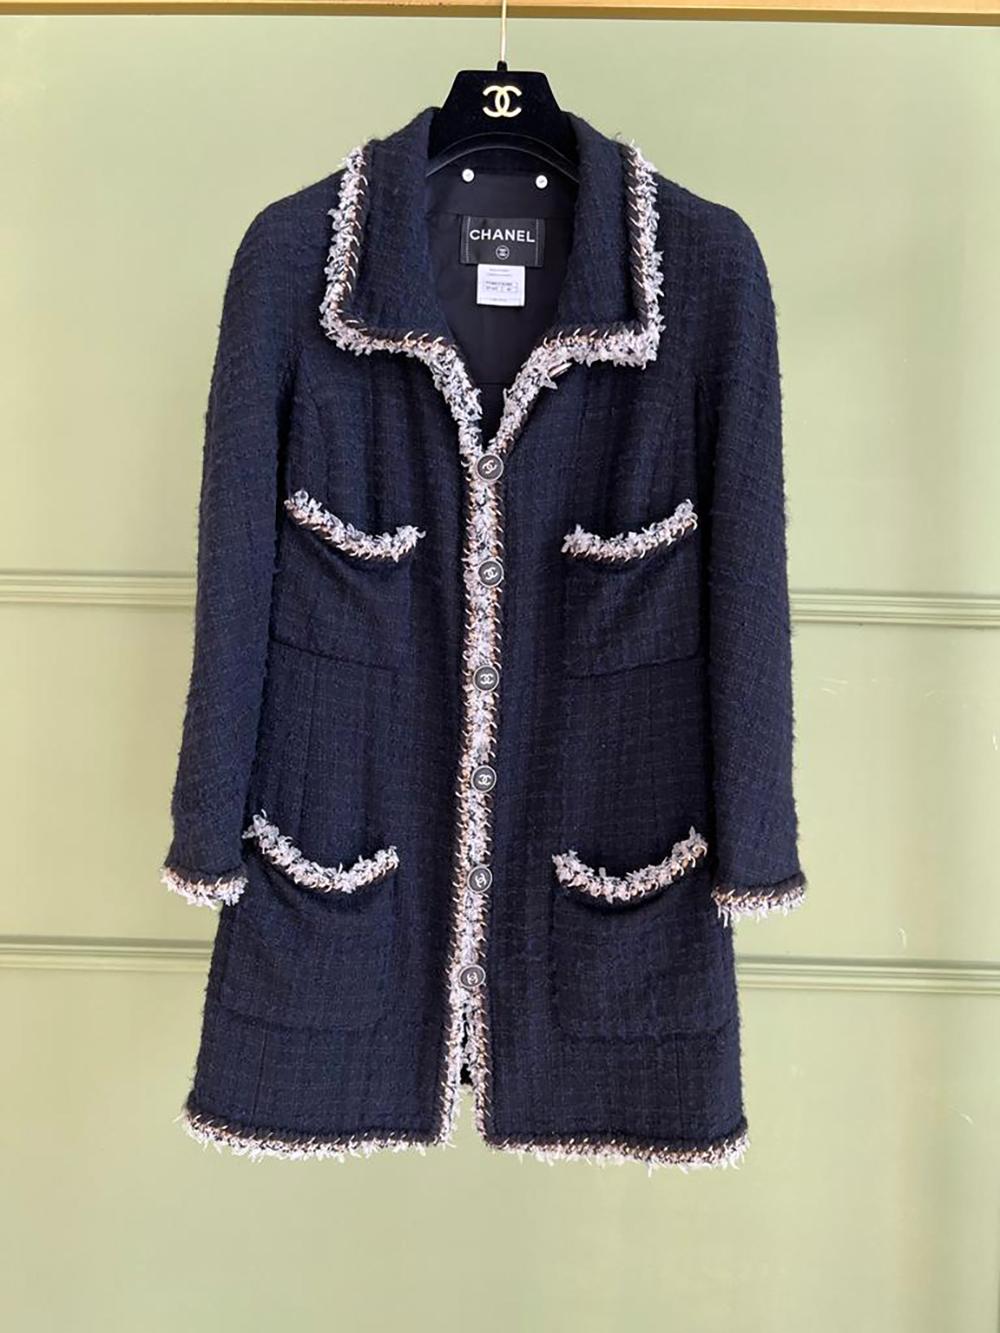 Rare, collectors Chanel black and blue tweed jacket with metallic chain trim detailing. 
Fully lined with 100% silk.
Size mark 40 FR. Excellent condition, only worn a few times.